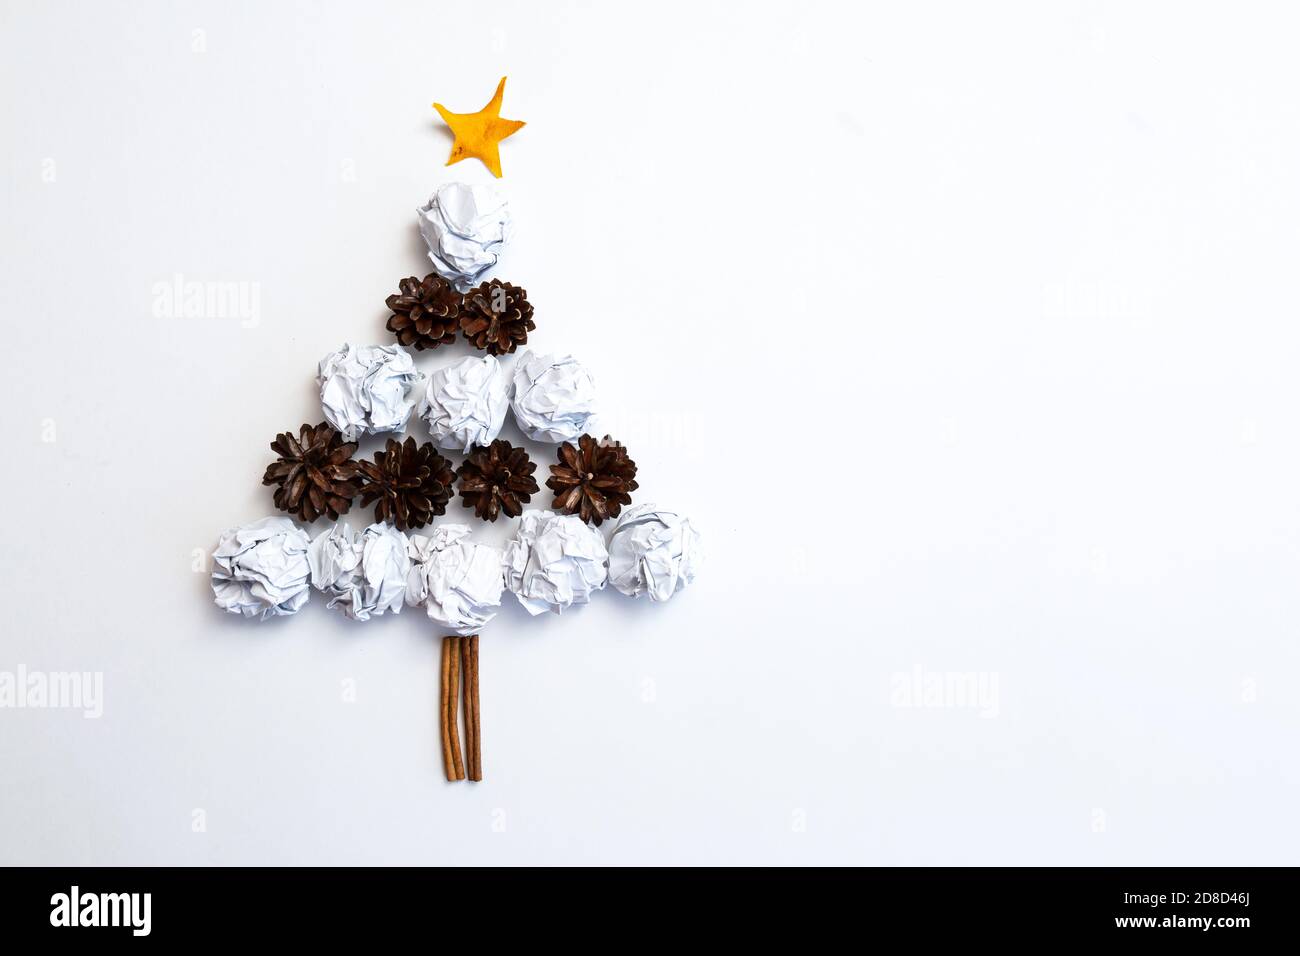 The Christmas tree is made of white paper crumpled into balls and pine cones on a white background. Christmas and New Year concept Stock Photo